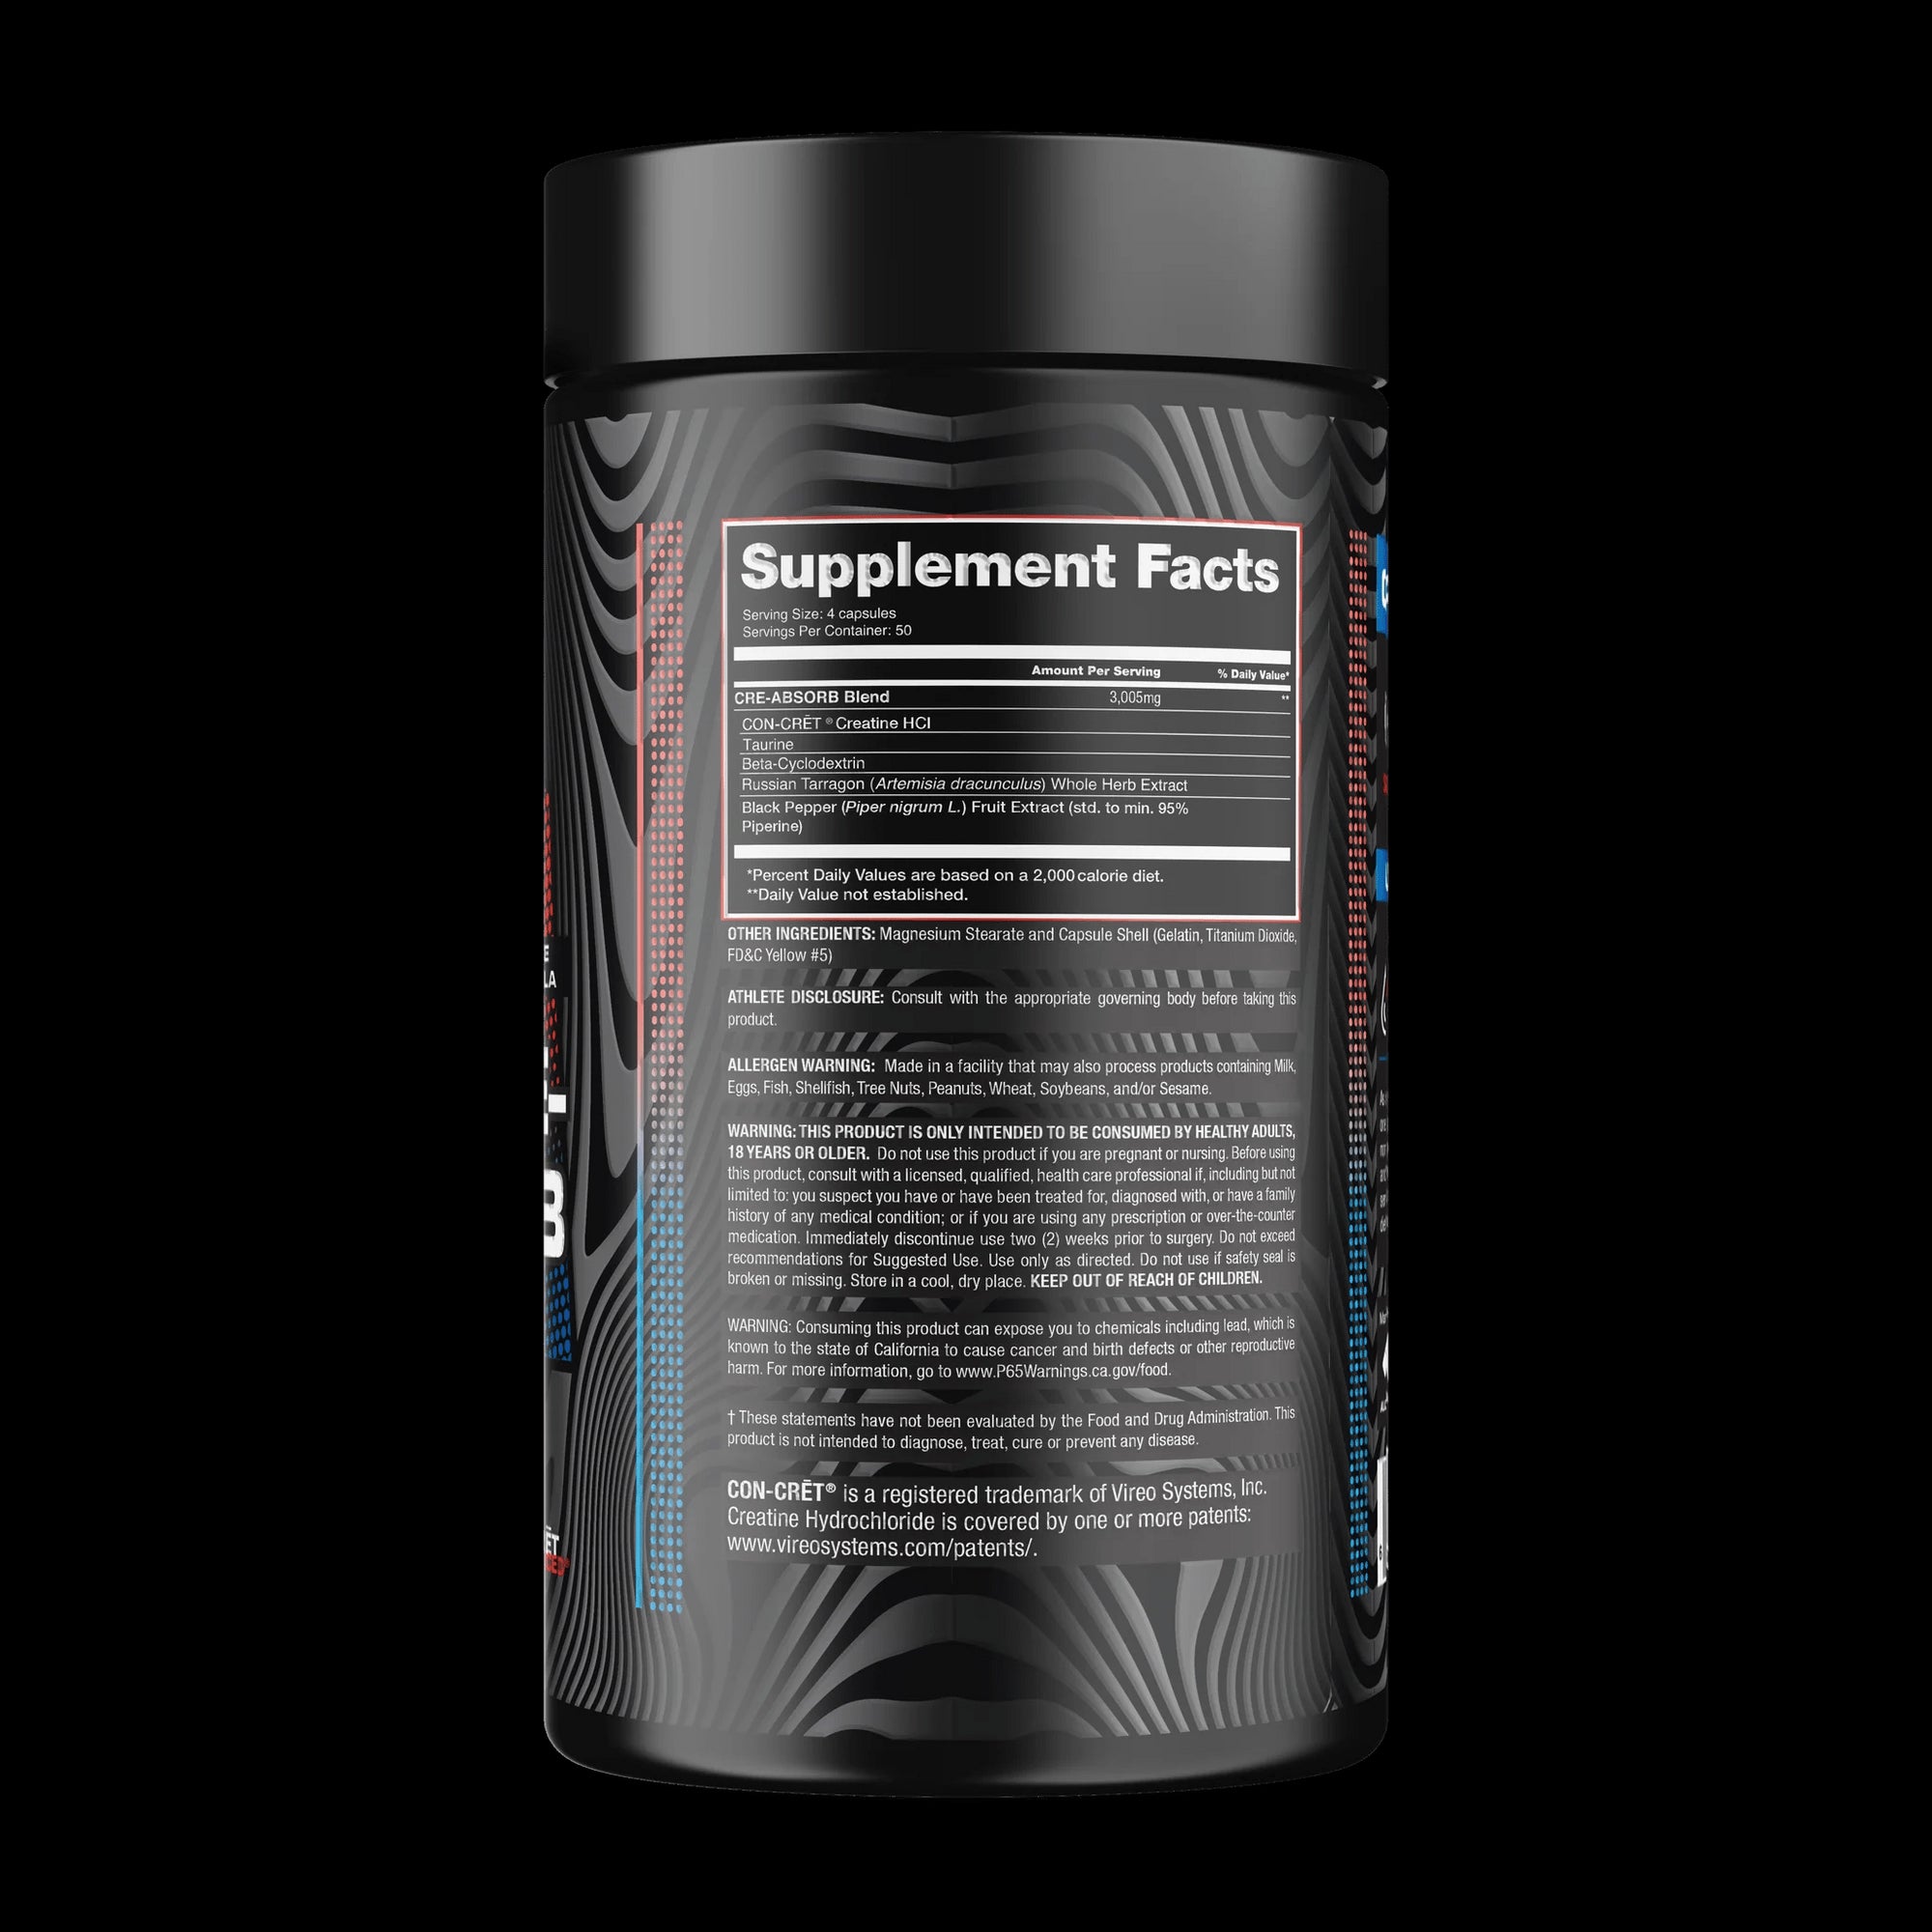 Alchemy Labs Cre-Absorb (New Formula) - Bemoxie Supplements